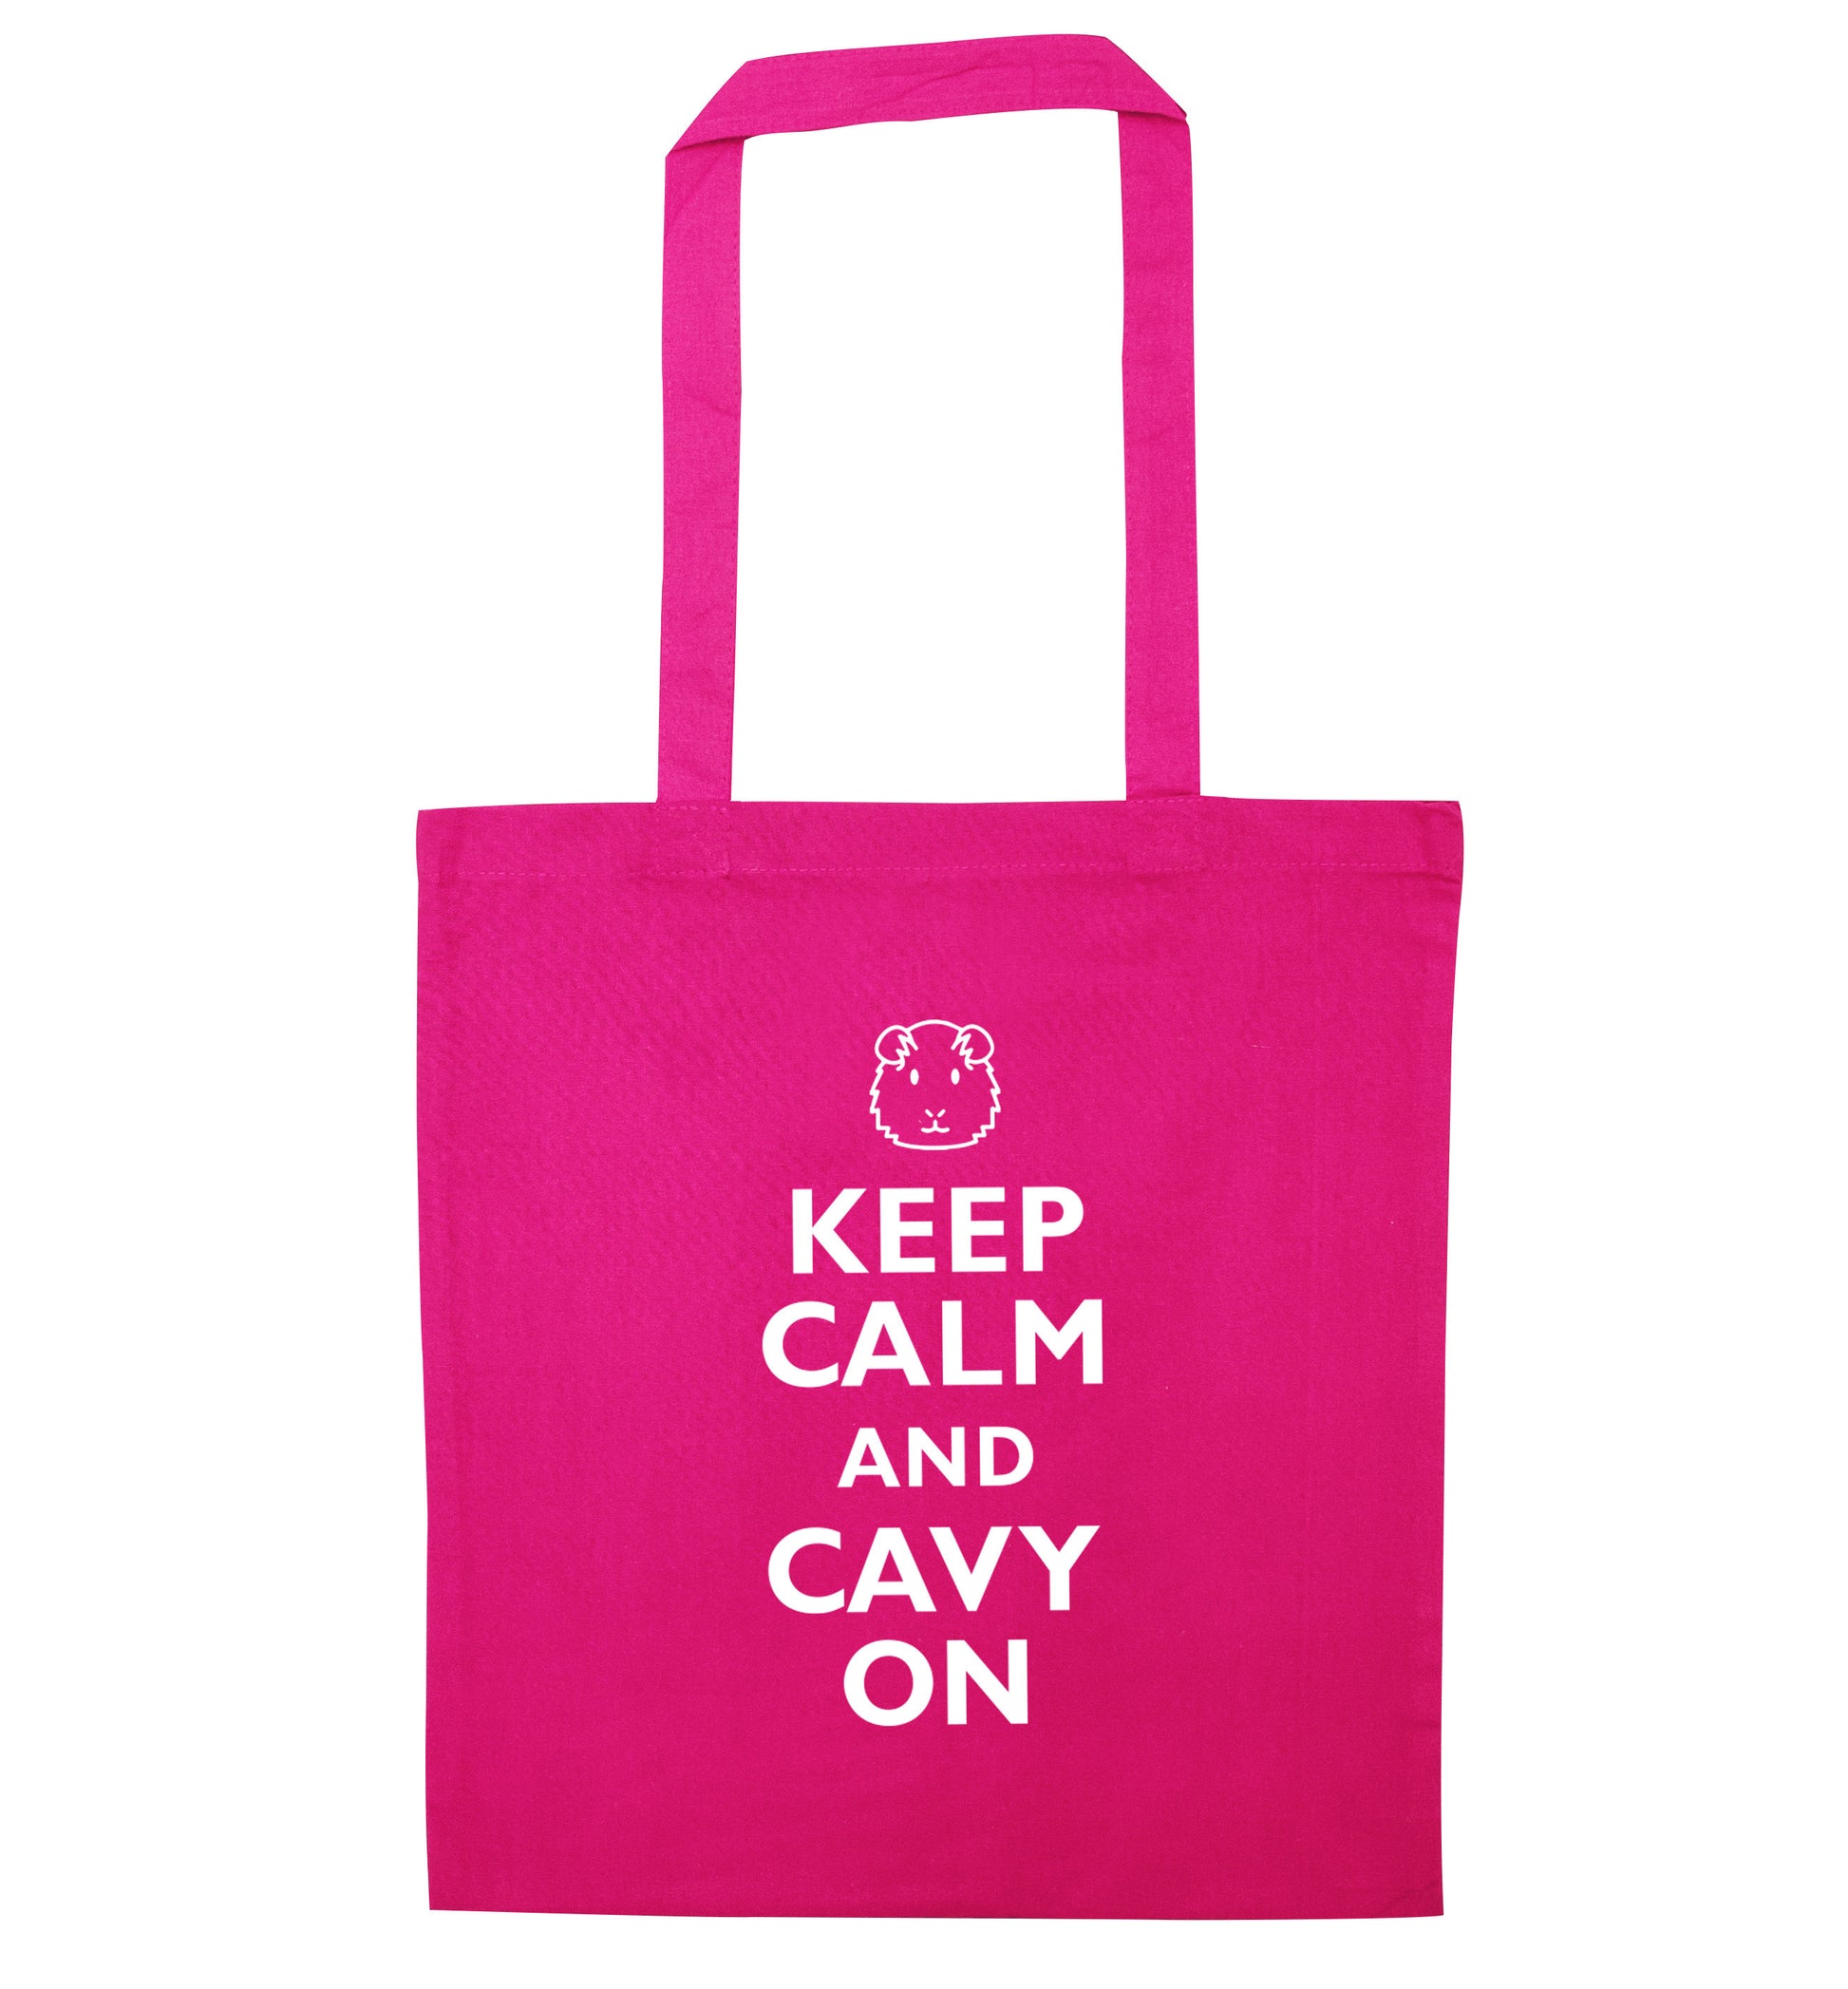 Keep calm and cavvy on pink tote bag